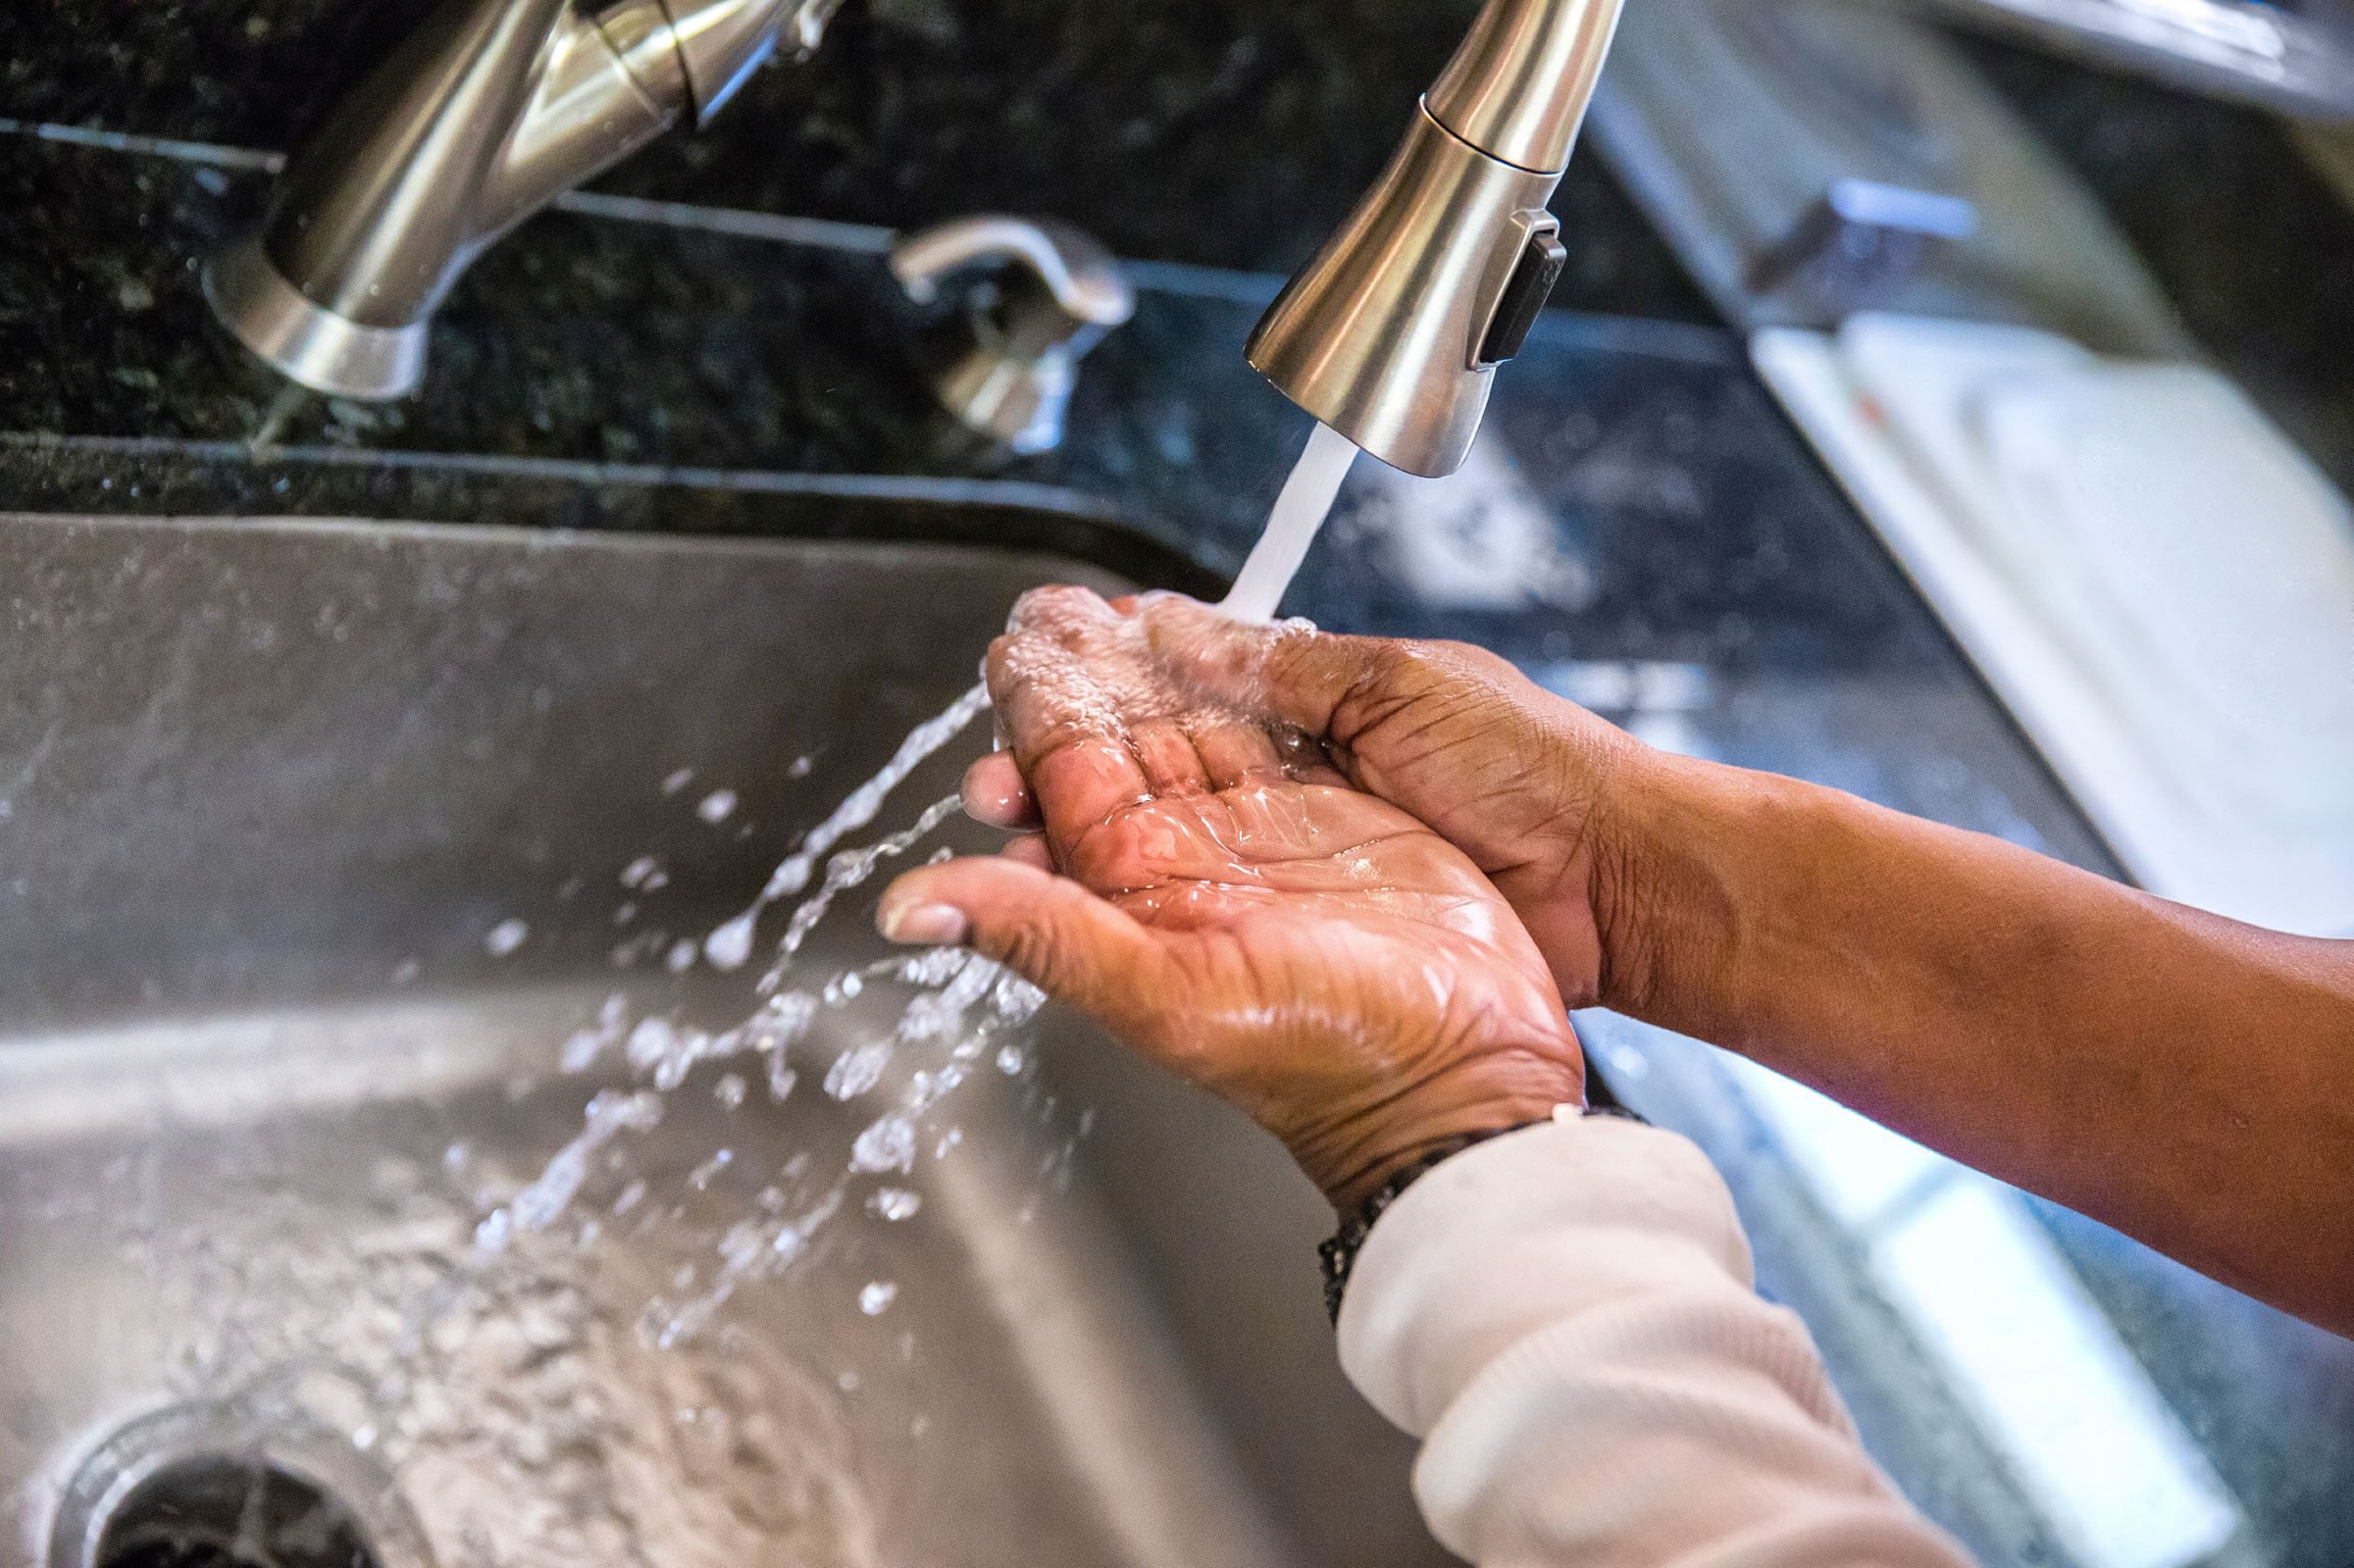 10 Ways You’re Washing Your Hands Wrong